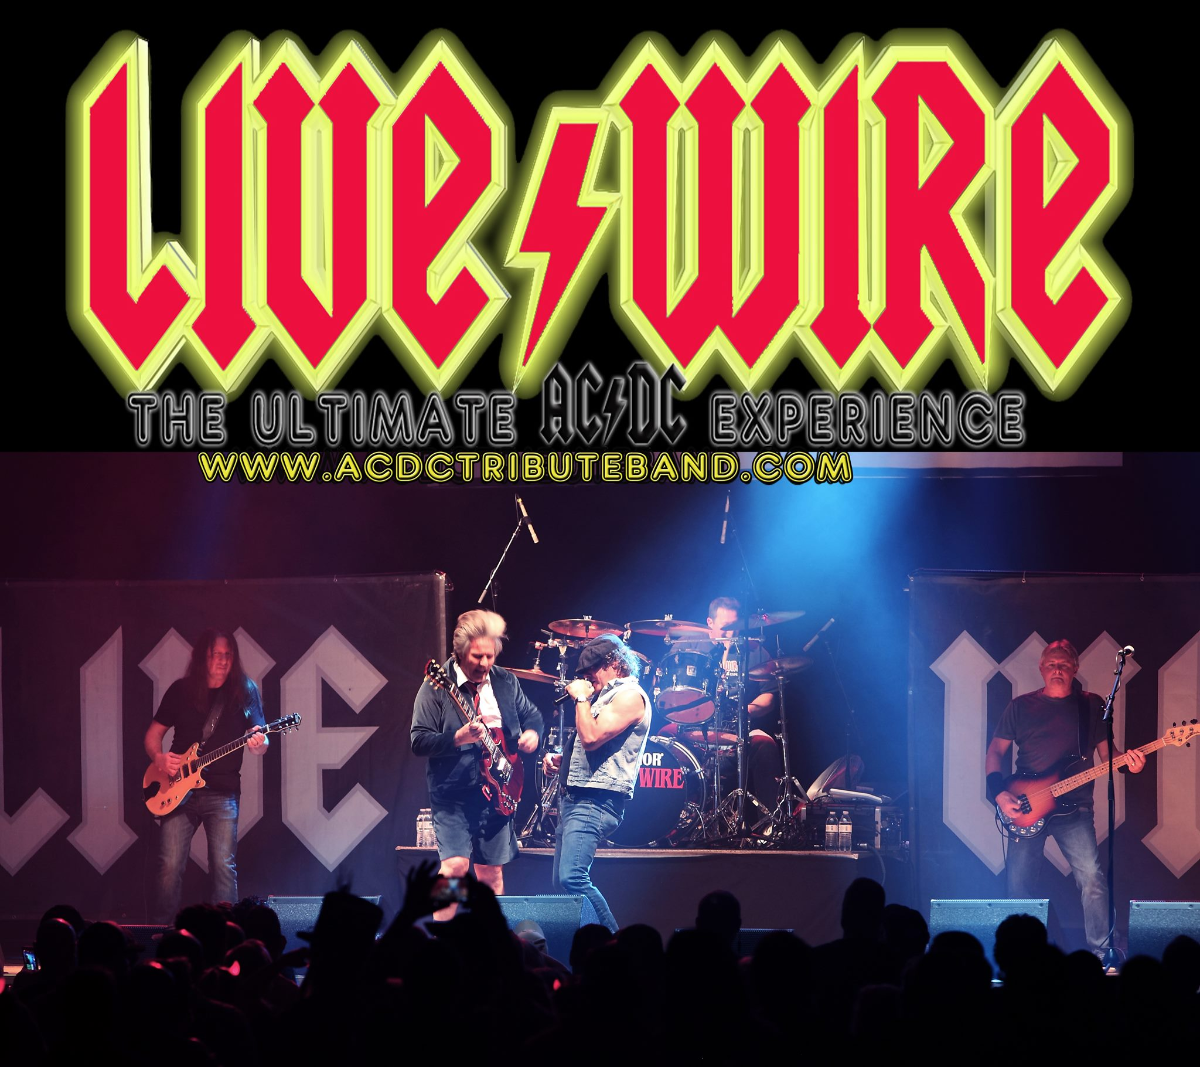 An Evening Live Wire: The Ultimate AC/DC at Elevation 27